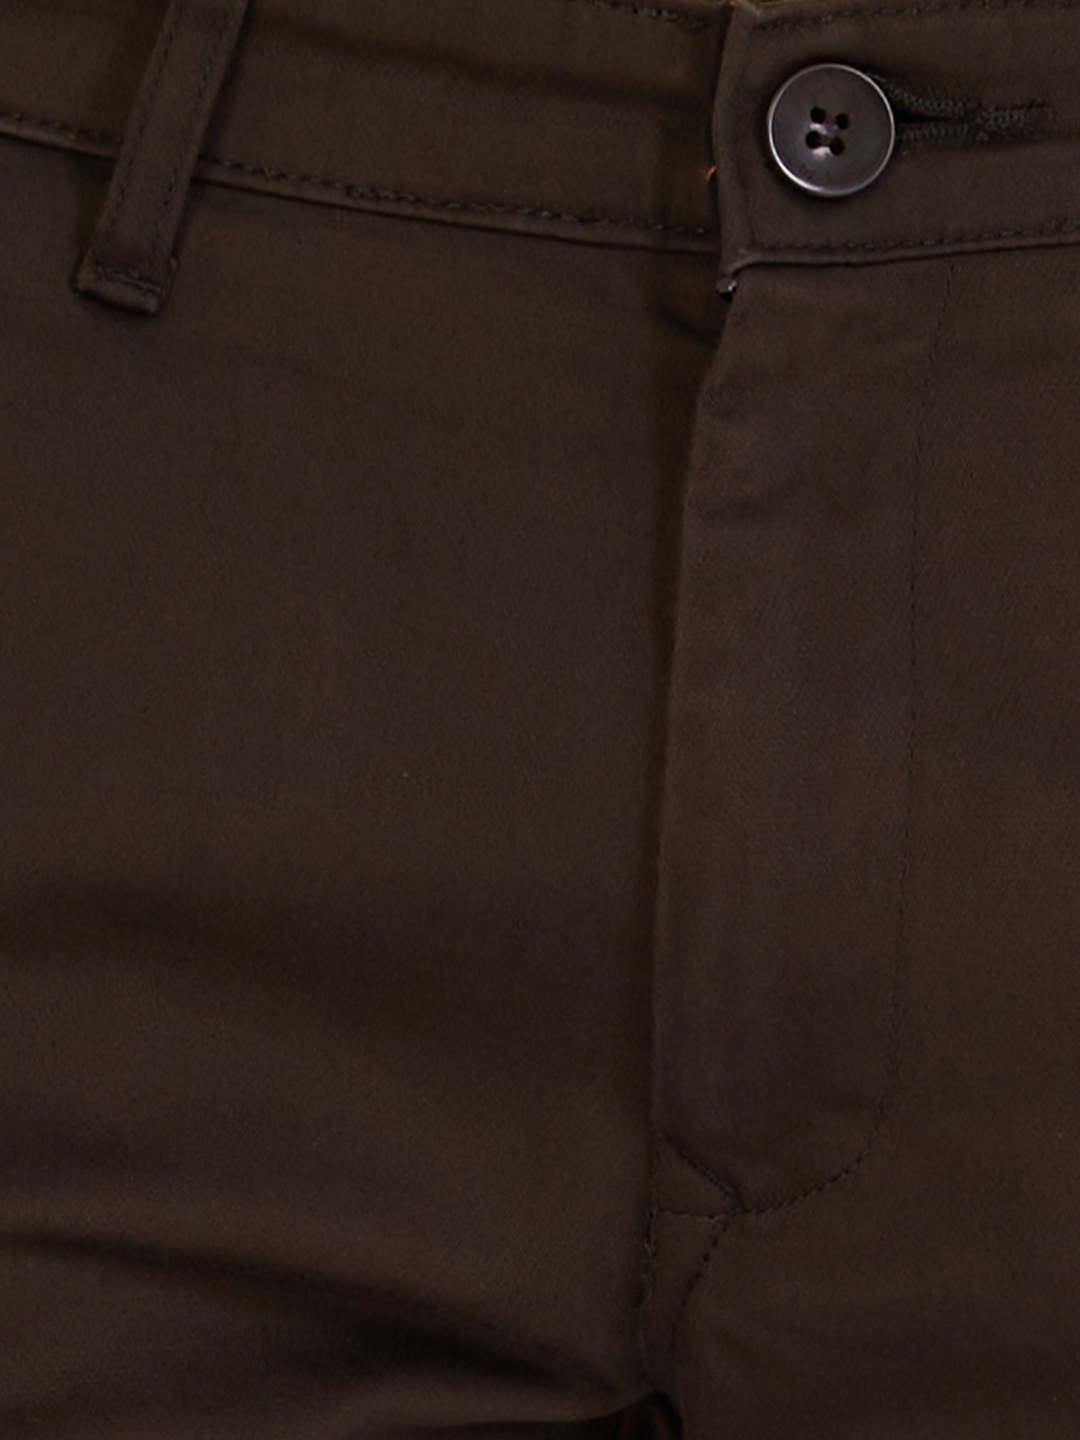 D'cot by Donear | D'cot by Donear Men's Brown Cotton Trousers 5